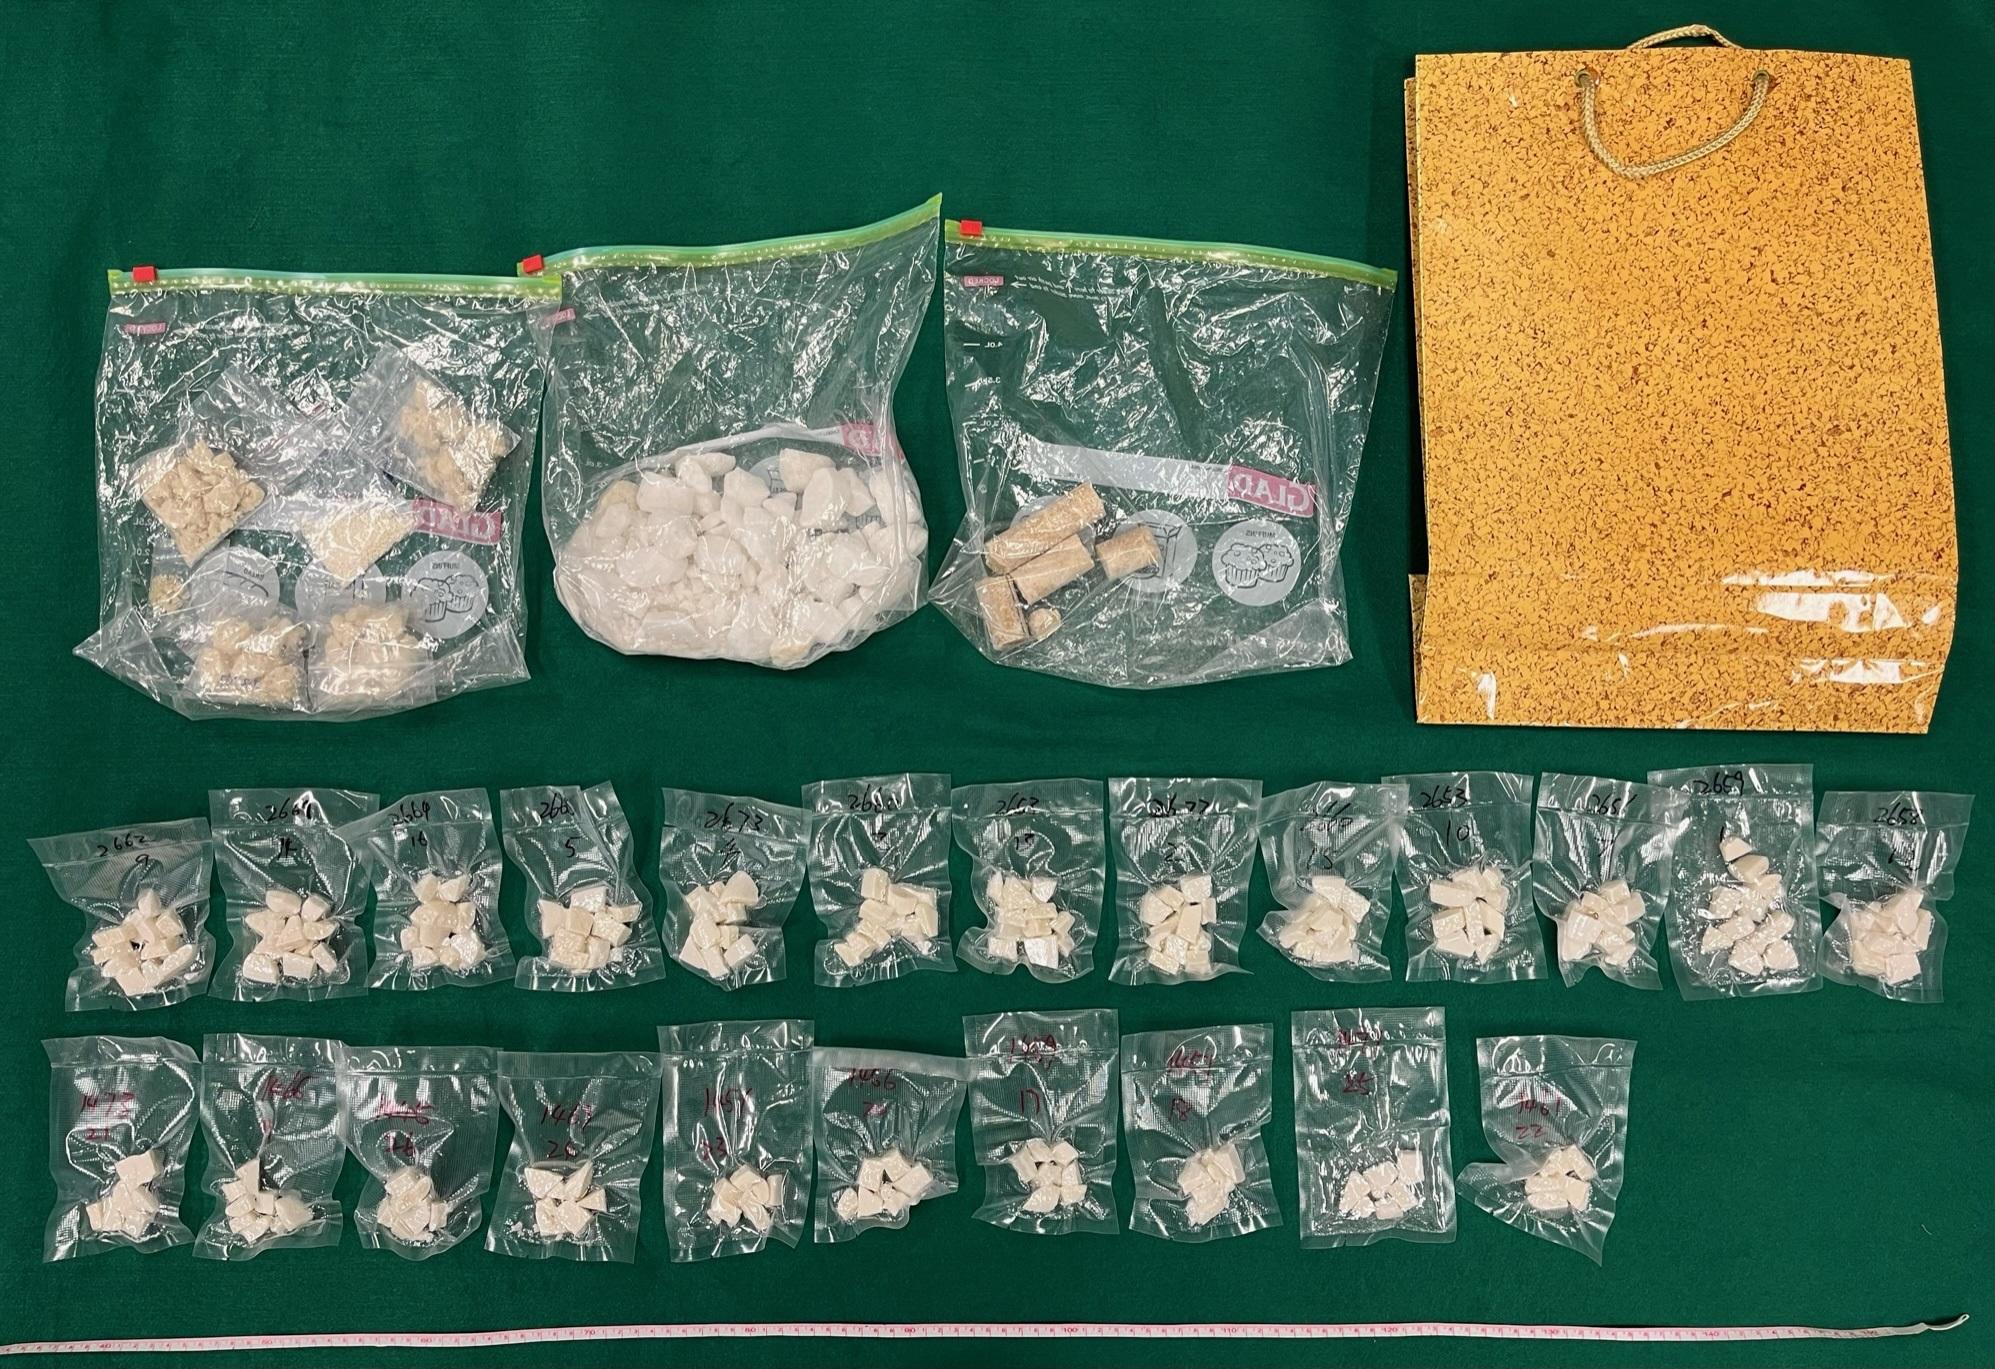 Hong Kong Customs yesterday (April 13) seized about 1.1 kilograms of suspected crack cocaine with an estimated market value of about $1.7 million in Tsuen Wan. Photo shows the suspected crack cocaine seized.